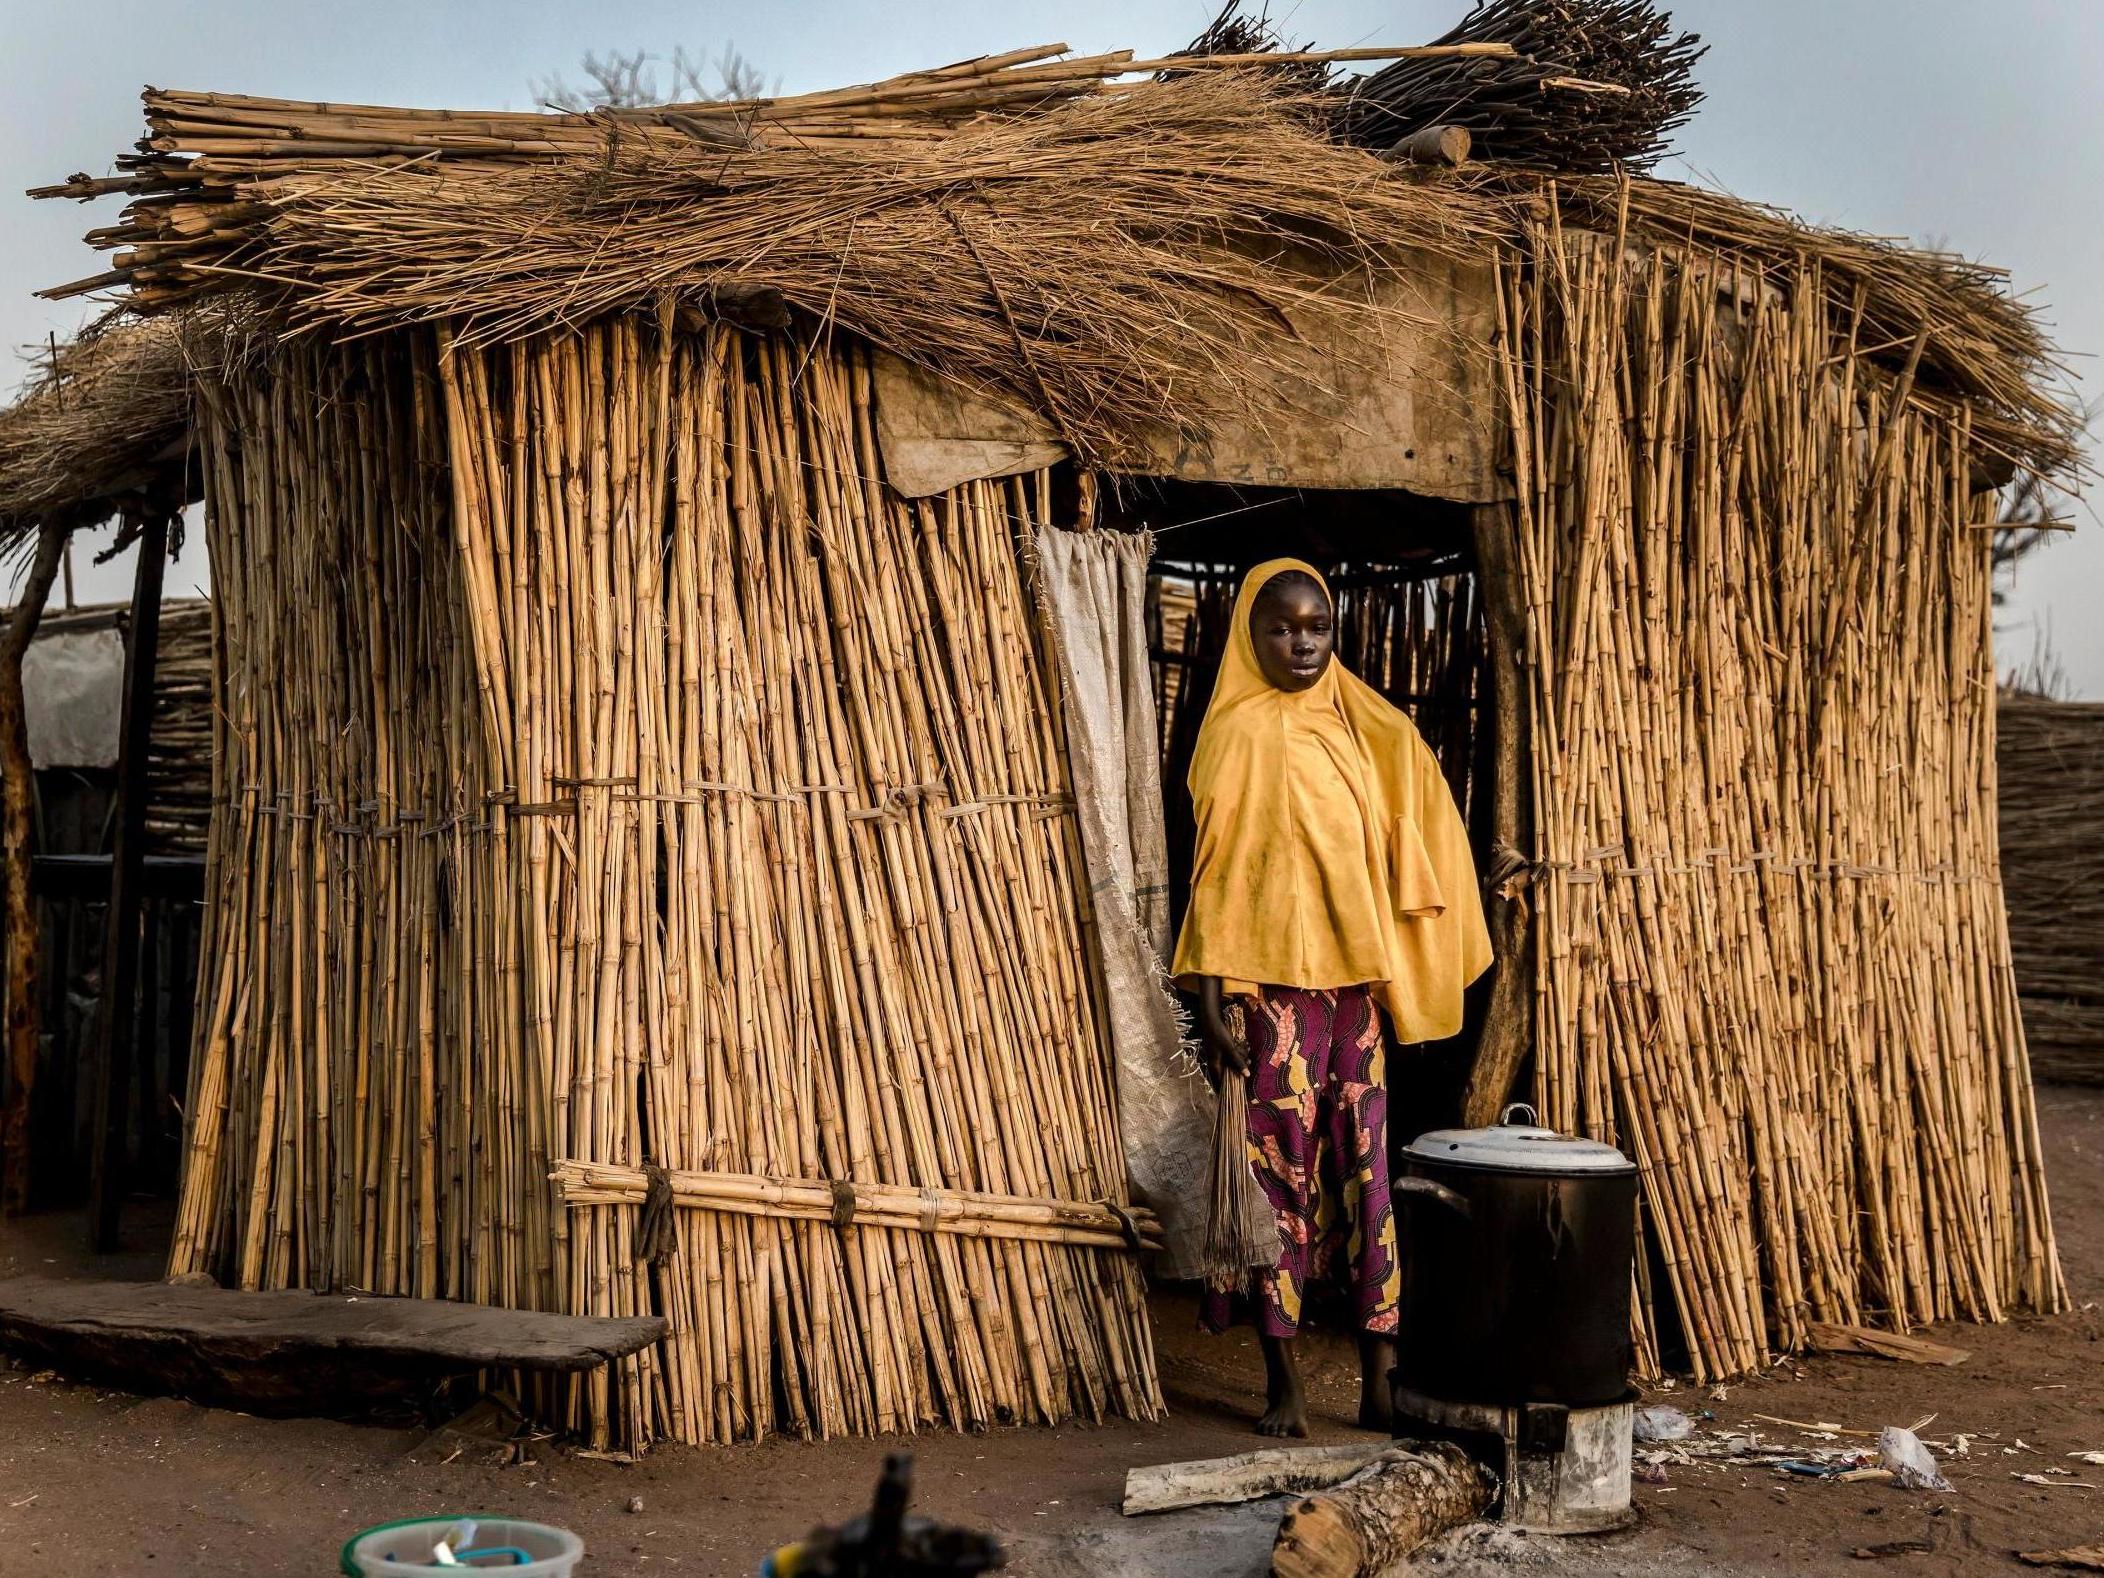 A girl cooks in front of her house at Malkohi refugee camp in Jimeta, Adamawa State, Nigeria on February 19, 2019.